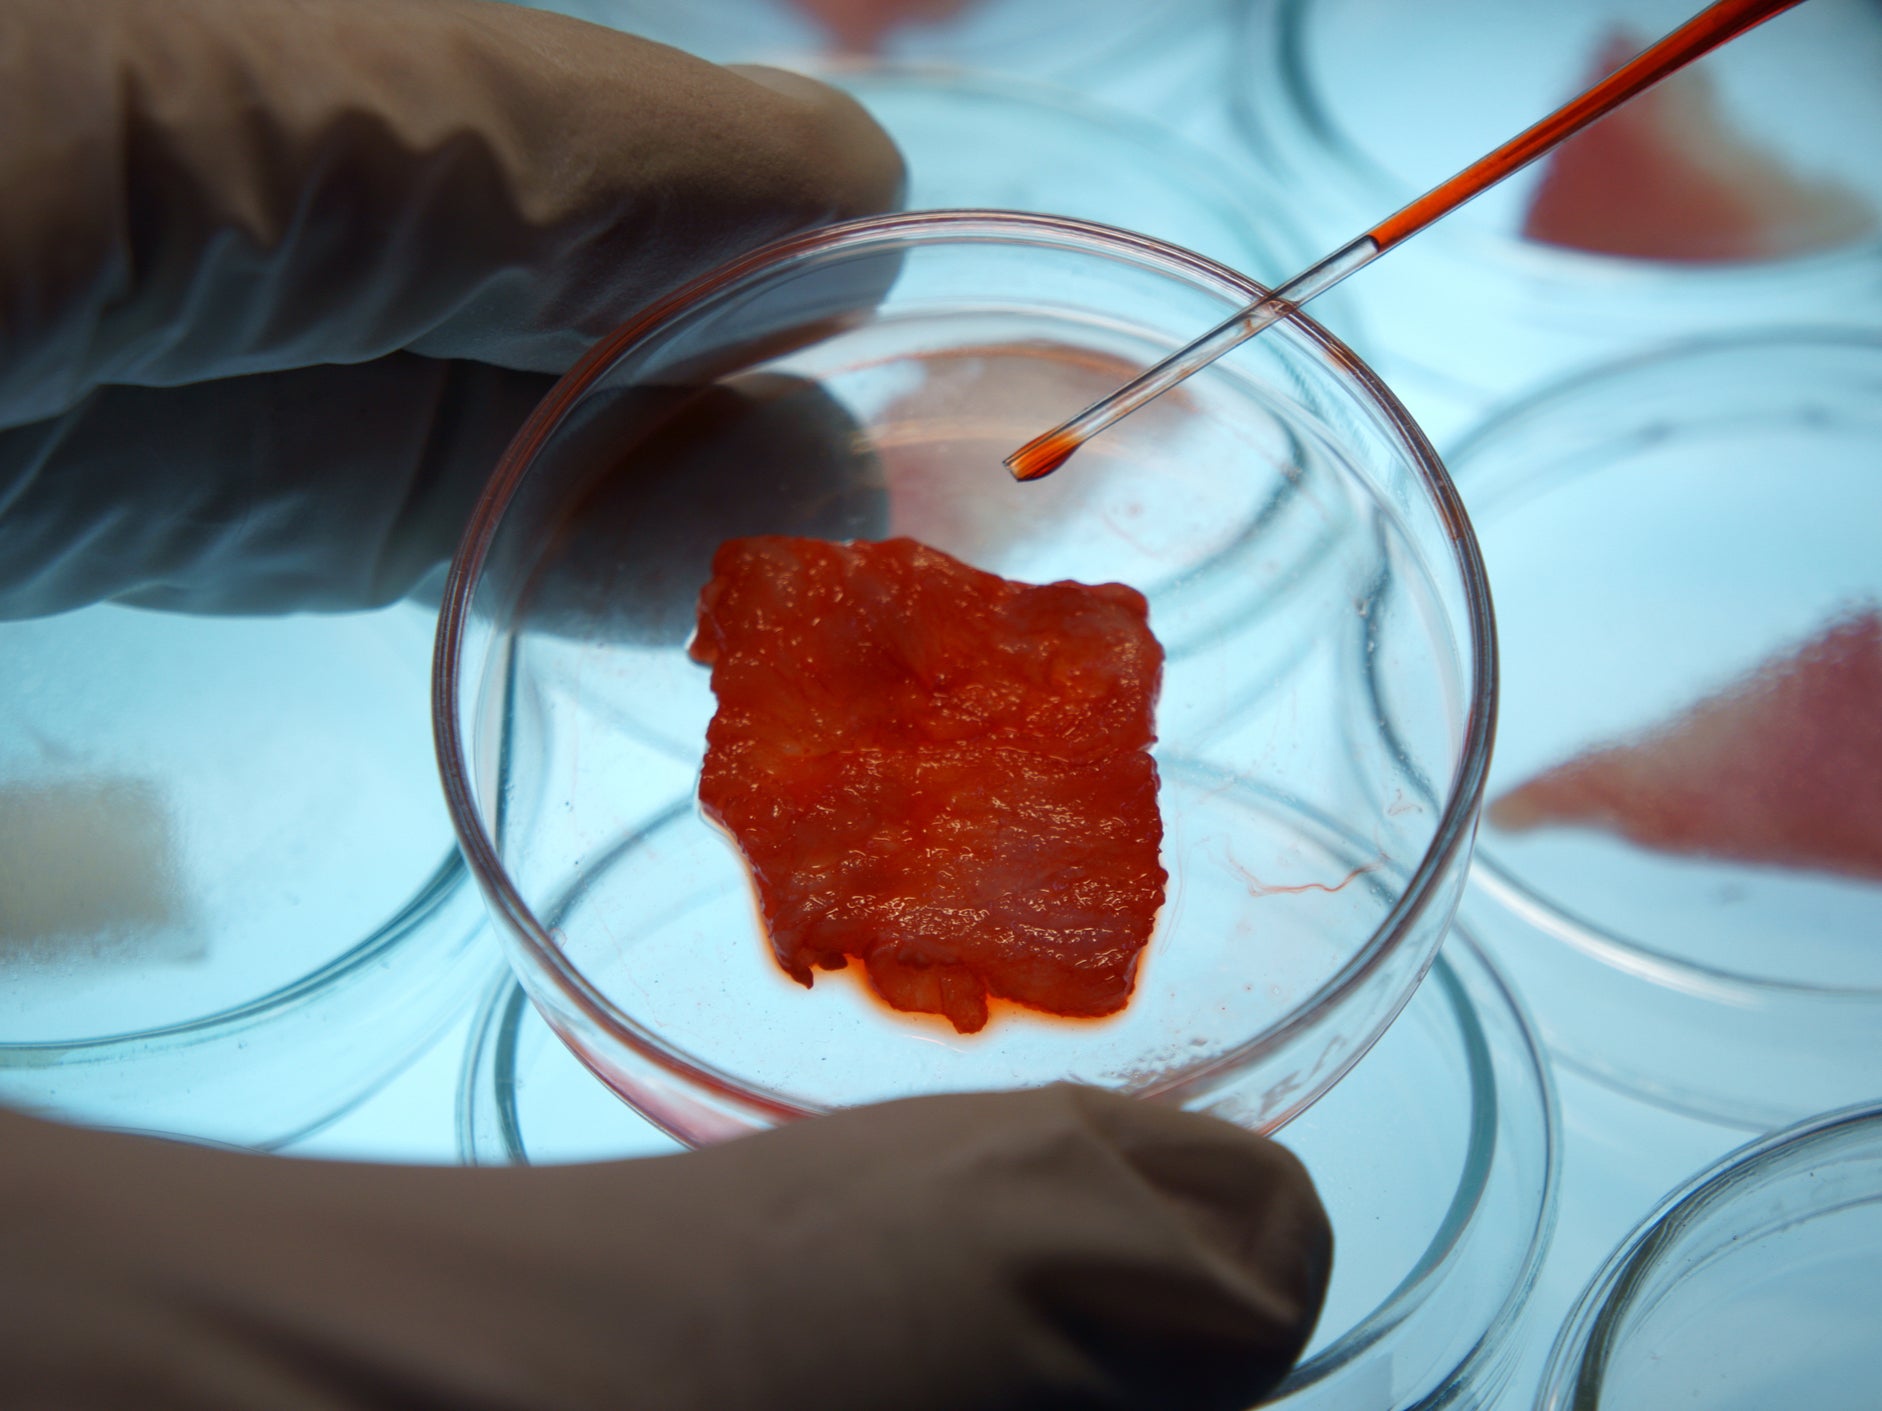 Lab-grown Meat or cultured meat is meat produced by in vitro cultivation of animal cells